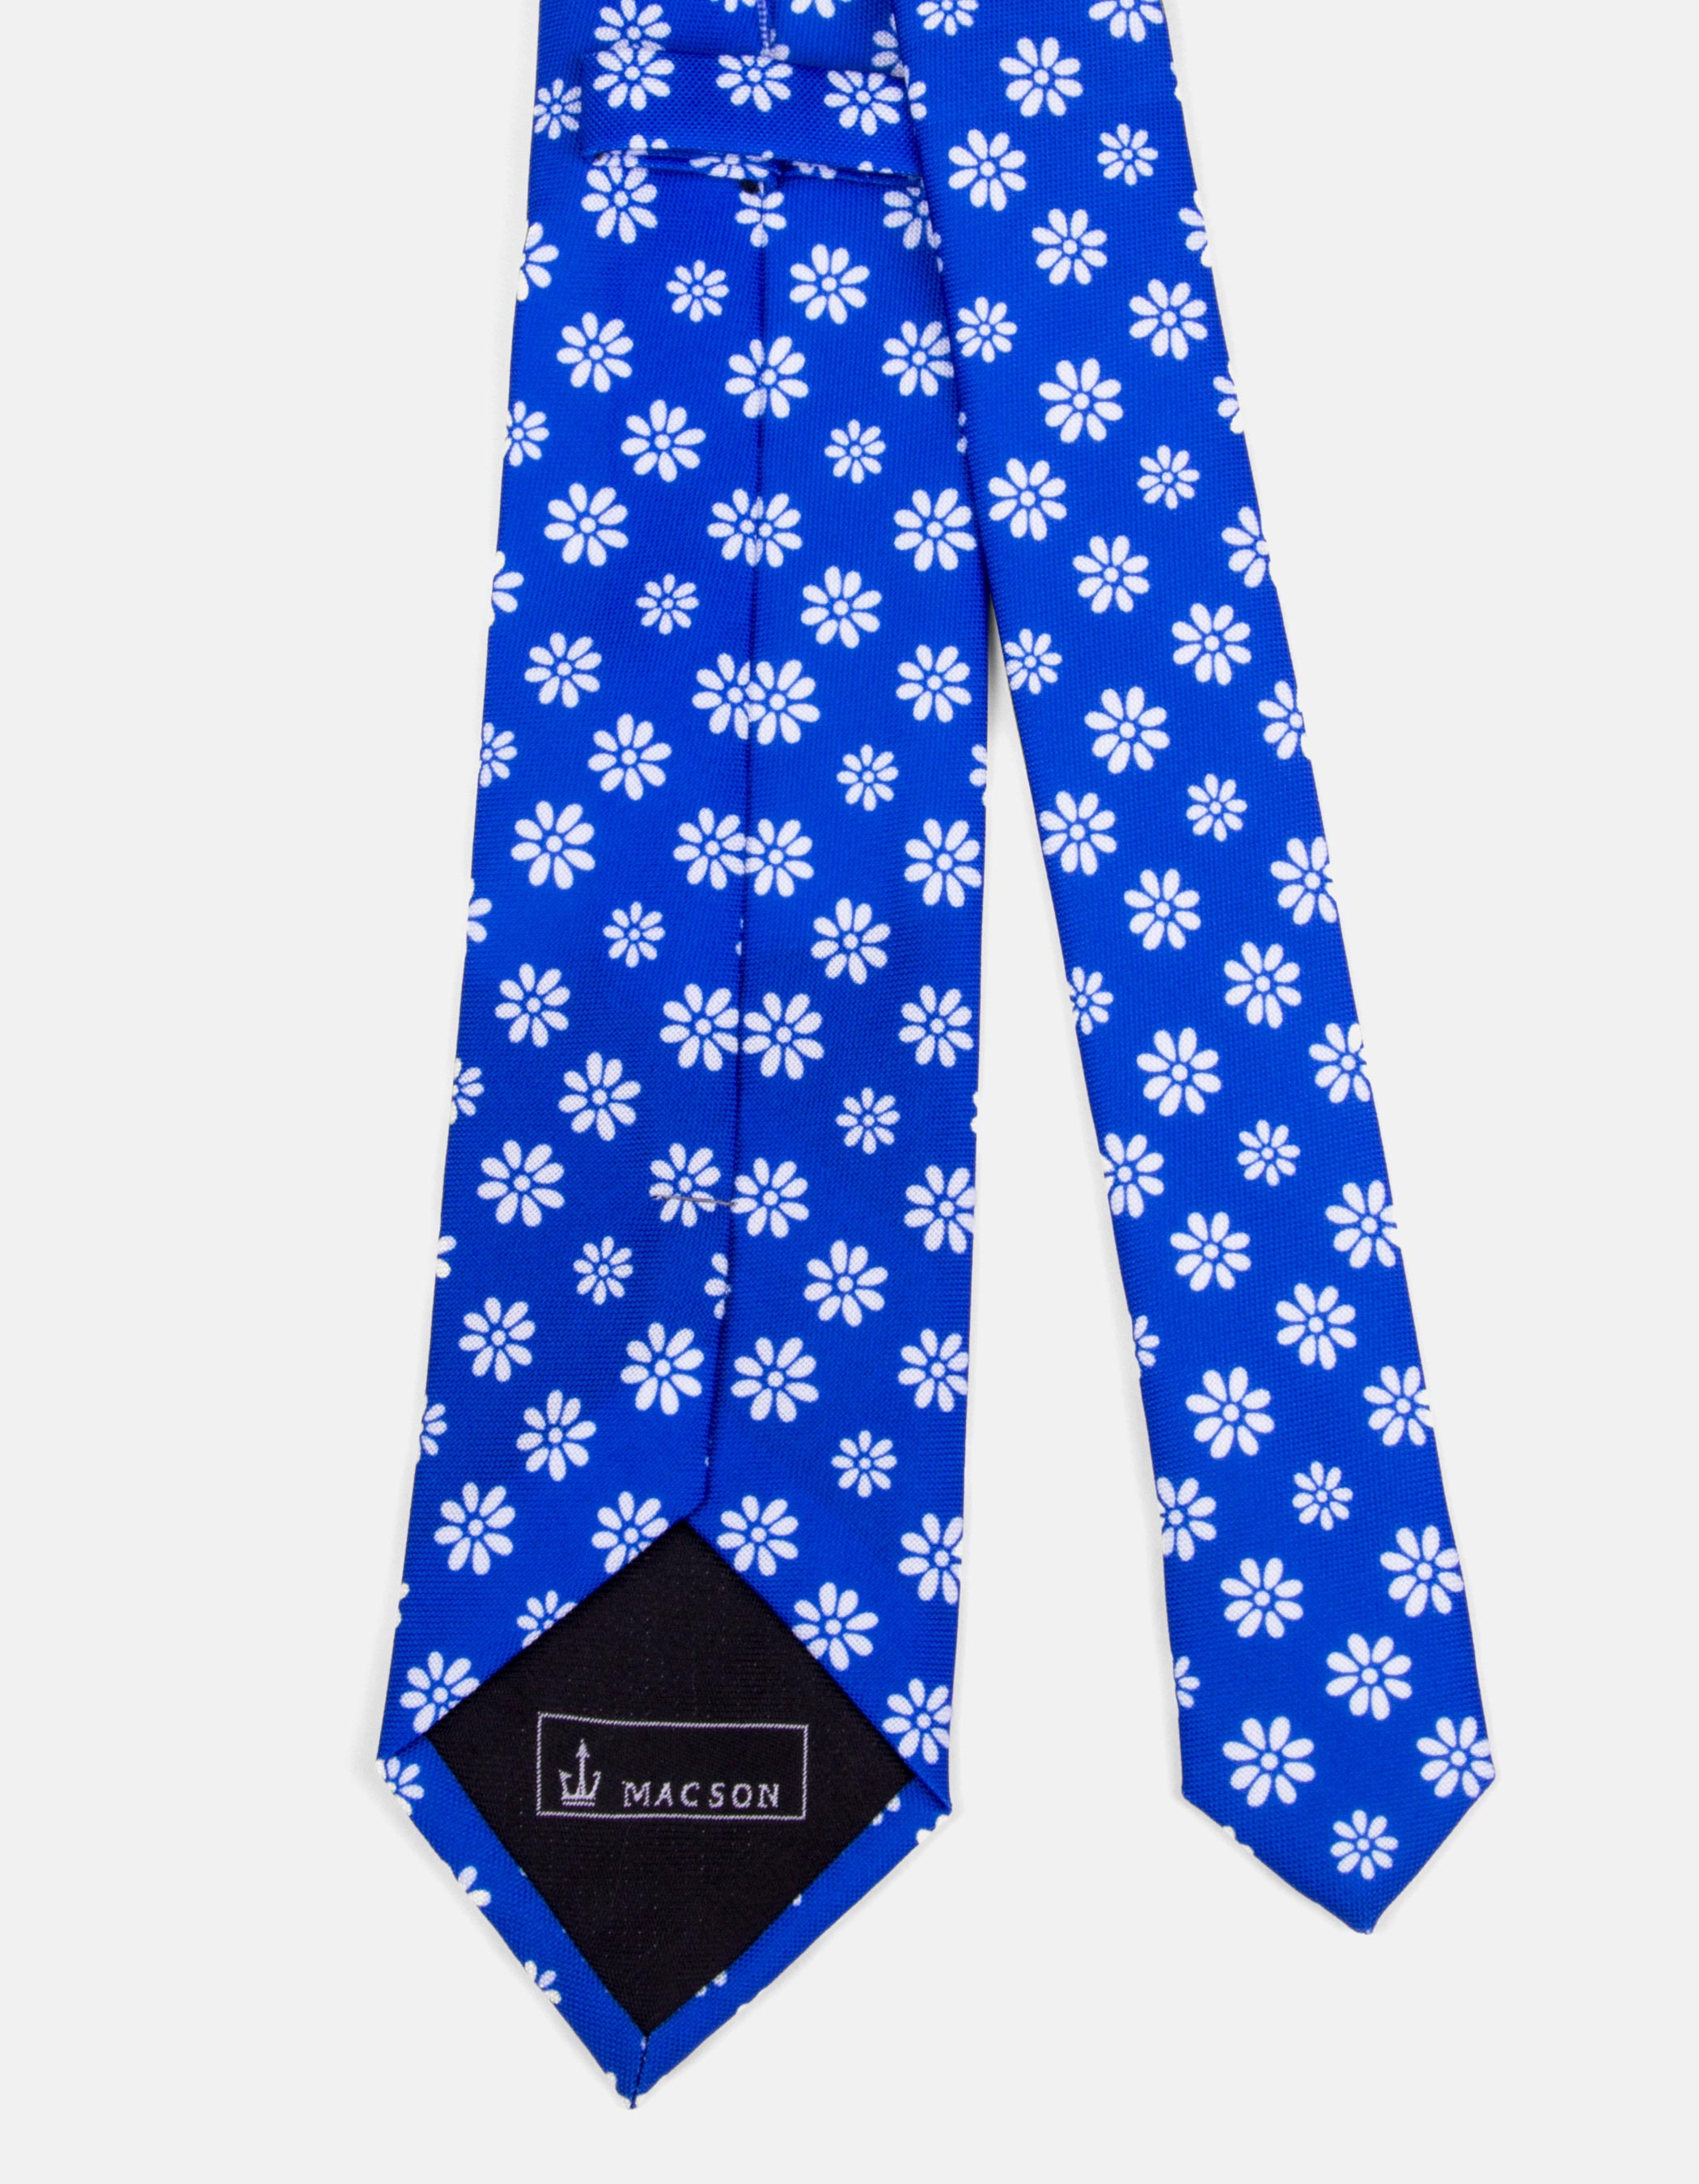 Patterned tie. 1